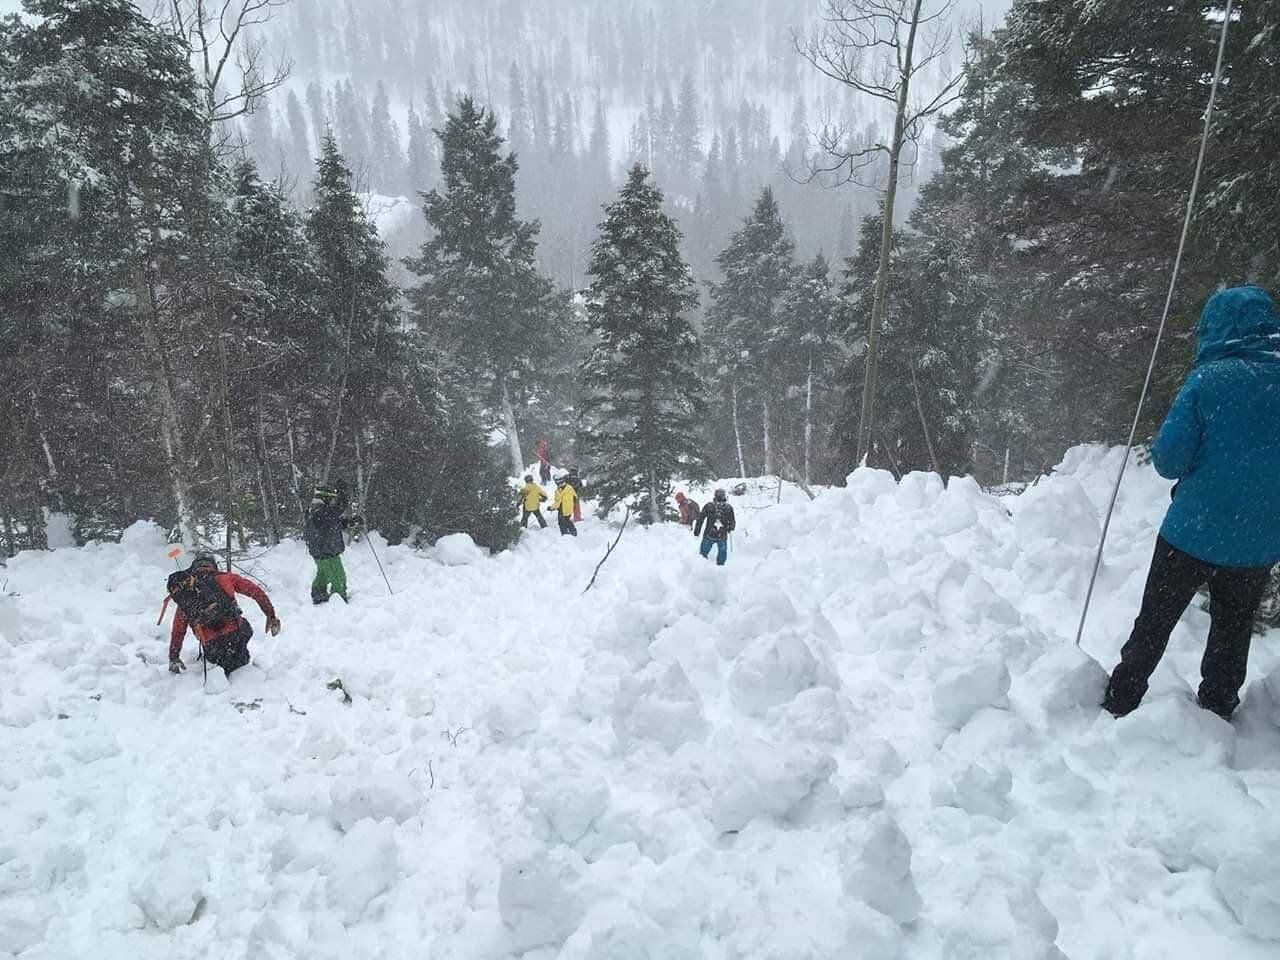 Rescue workers looking for bodies after an avalanche in the Taos Ski Valley in New Mexico on March 13, 2019.